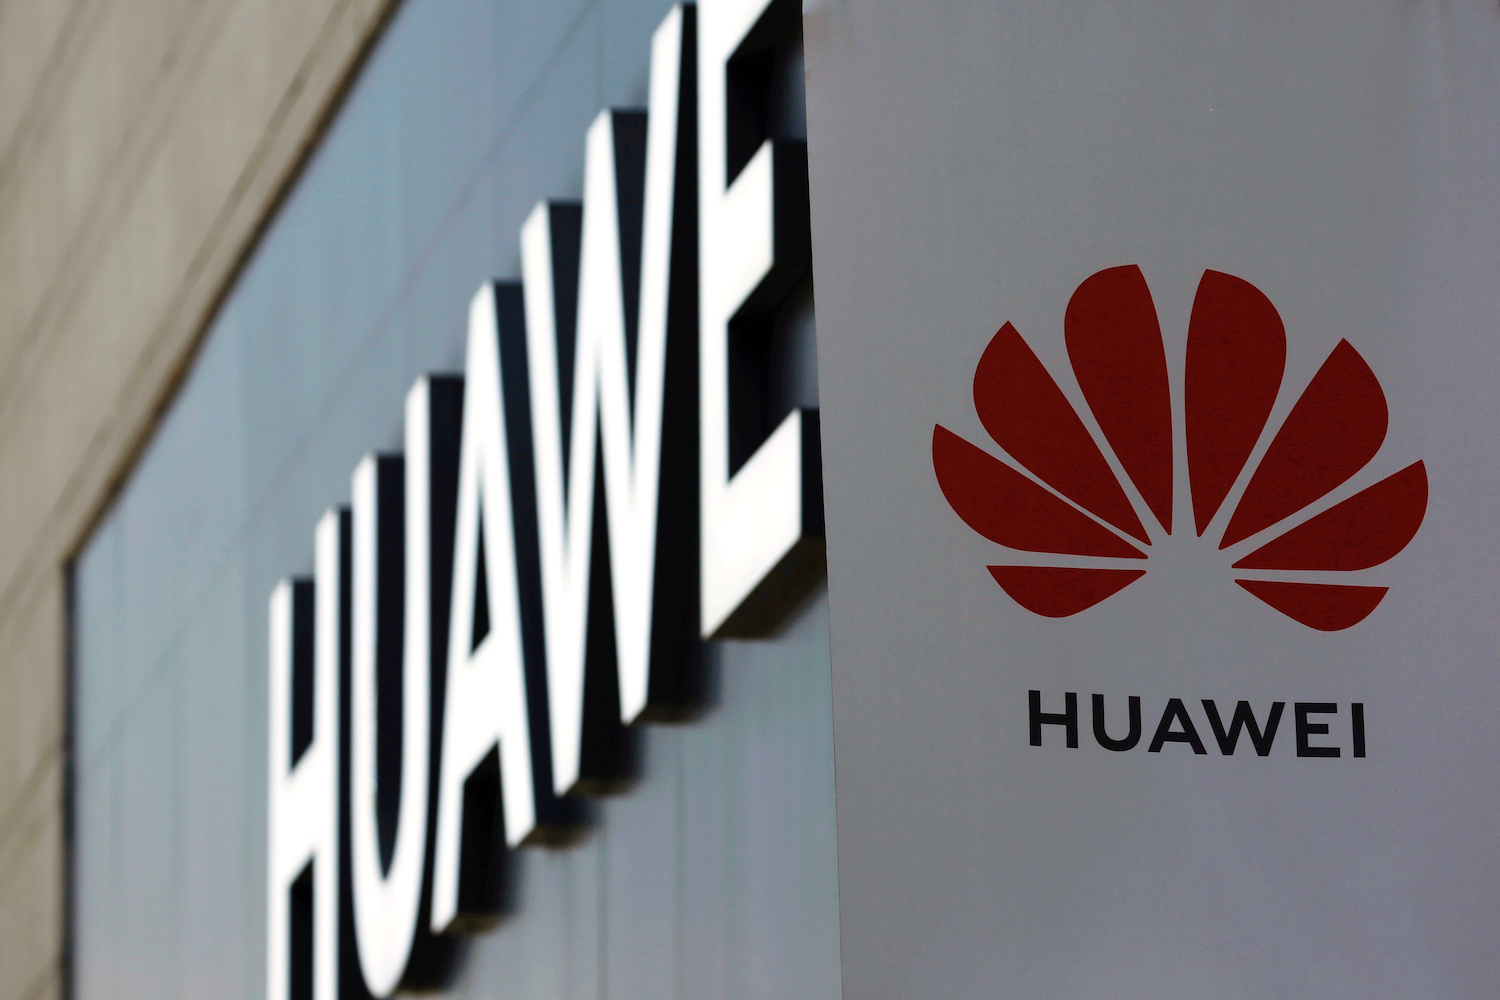 Sliver of hope for Huawei as SMIC develops its own chip tech